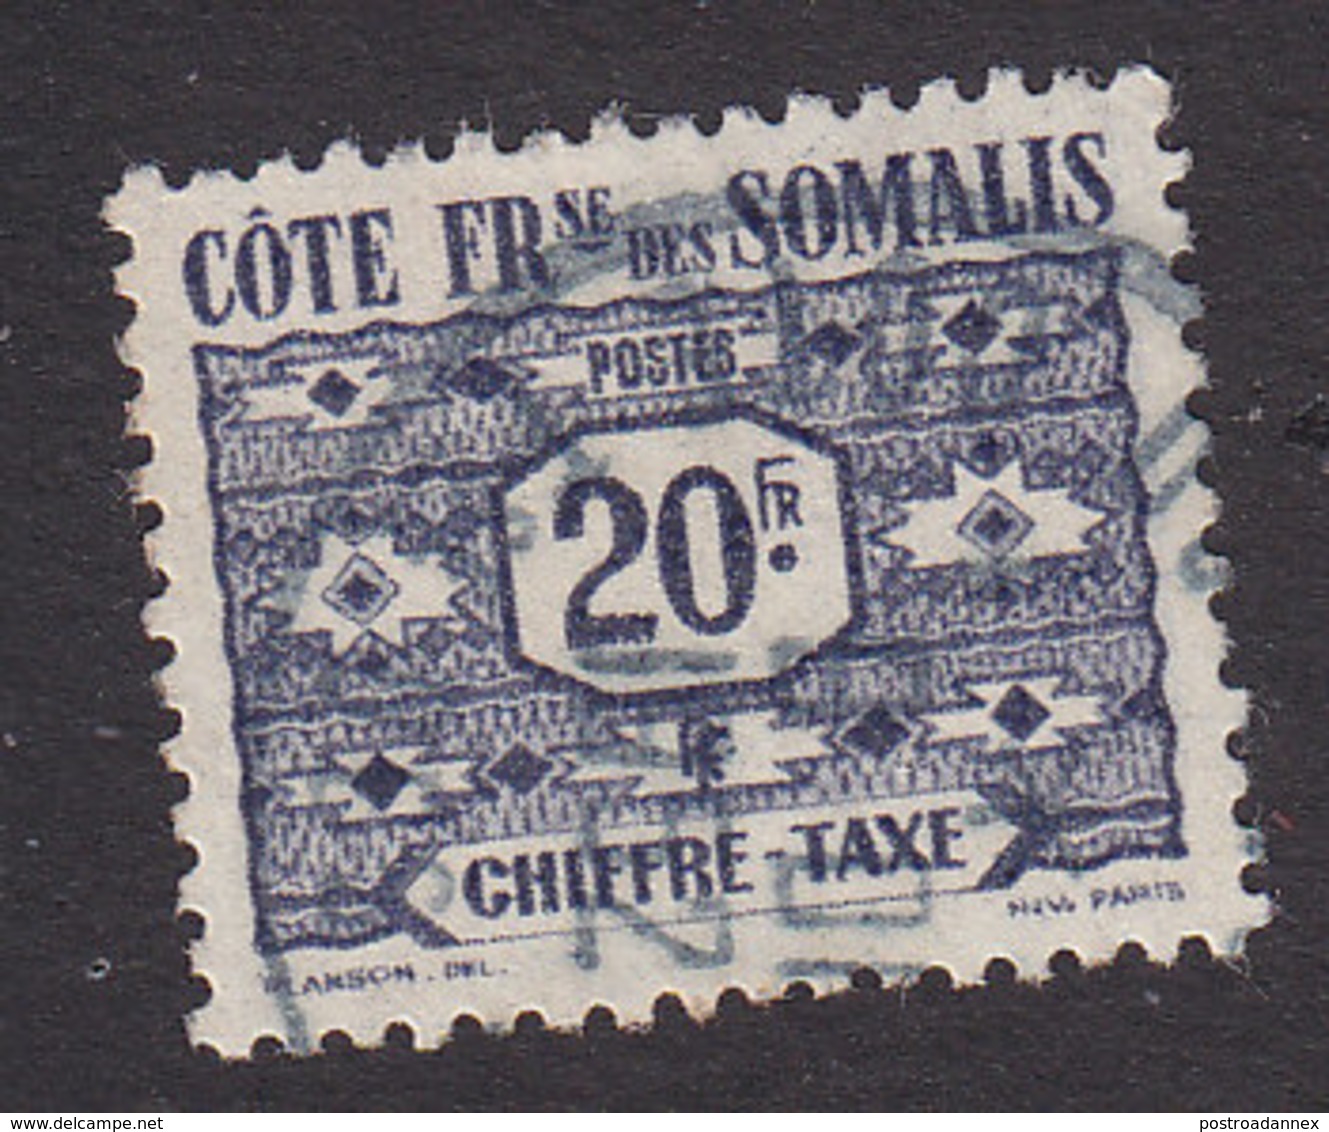 French Somali Coast, Scott #J48, Used, Postage Due, Issued 1947 - Used Stamps